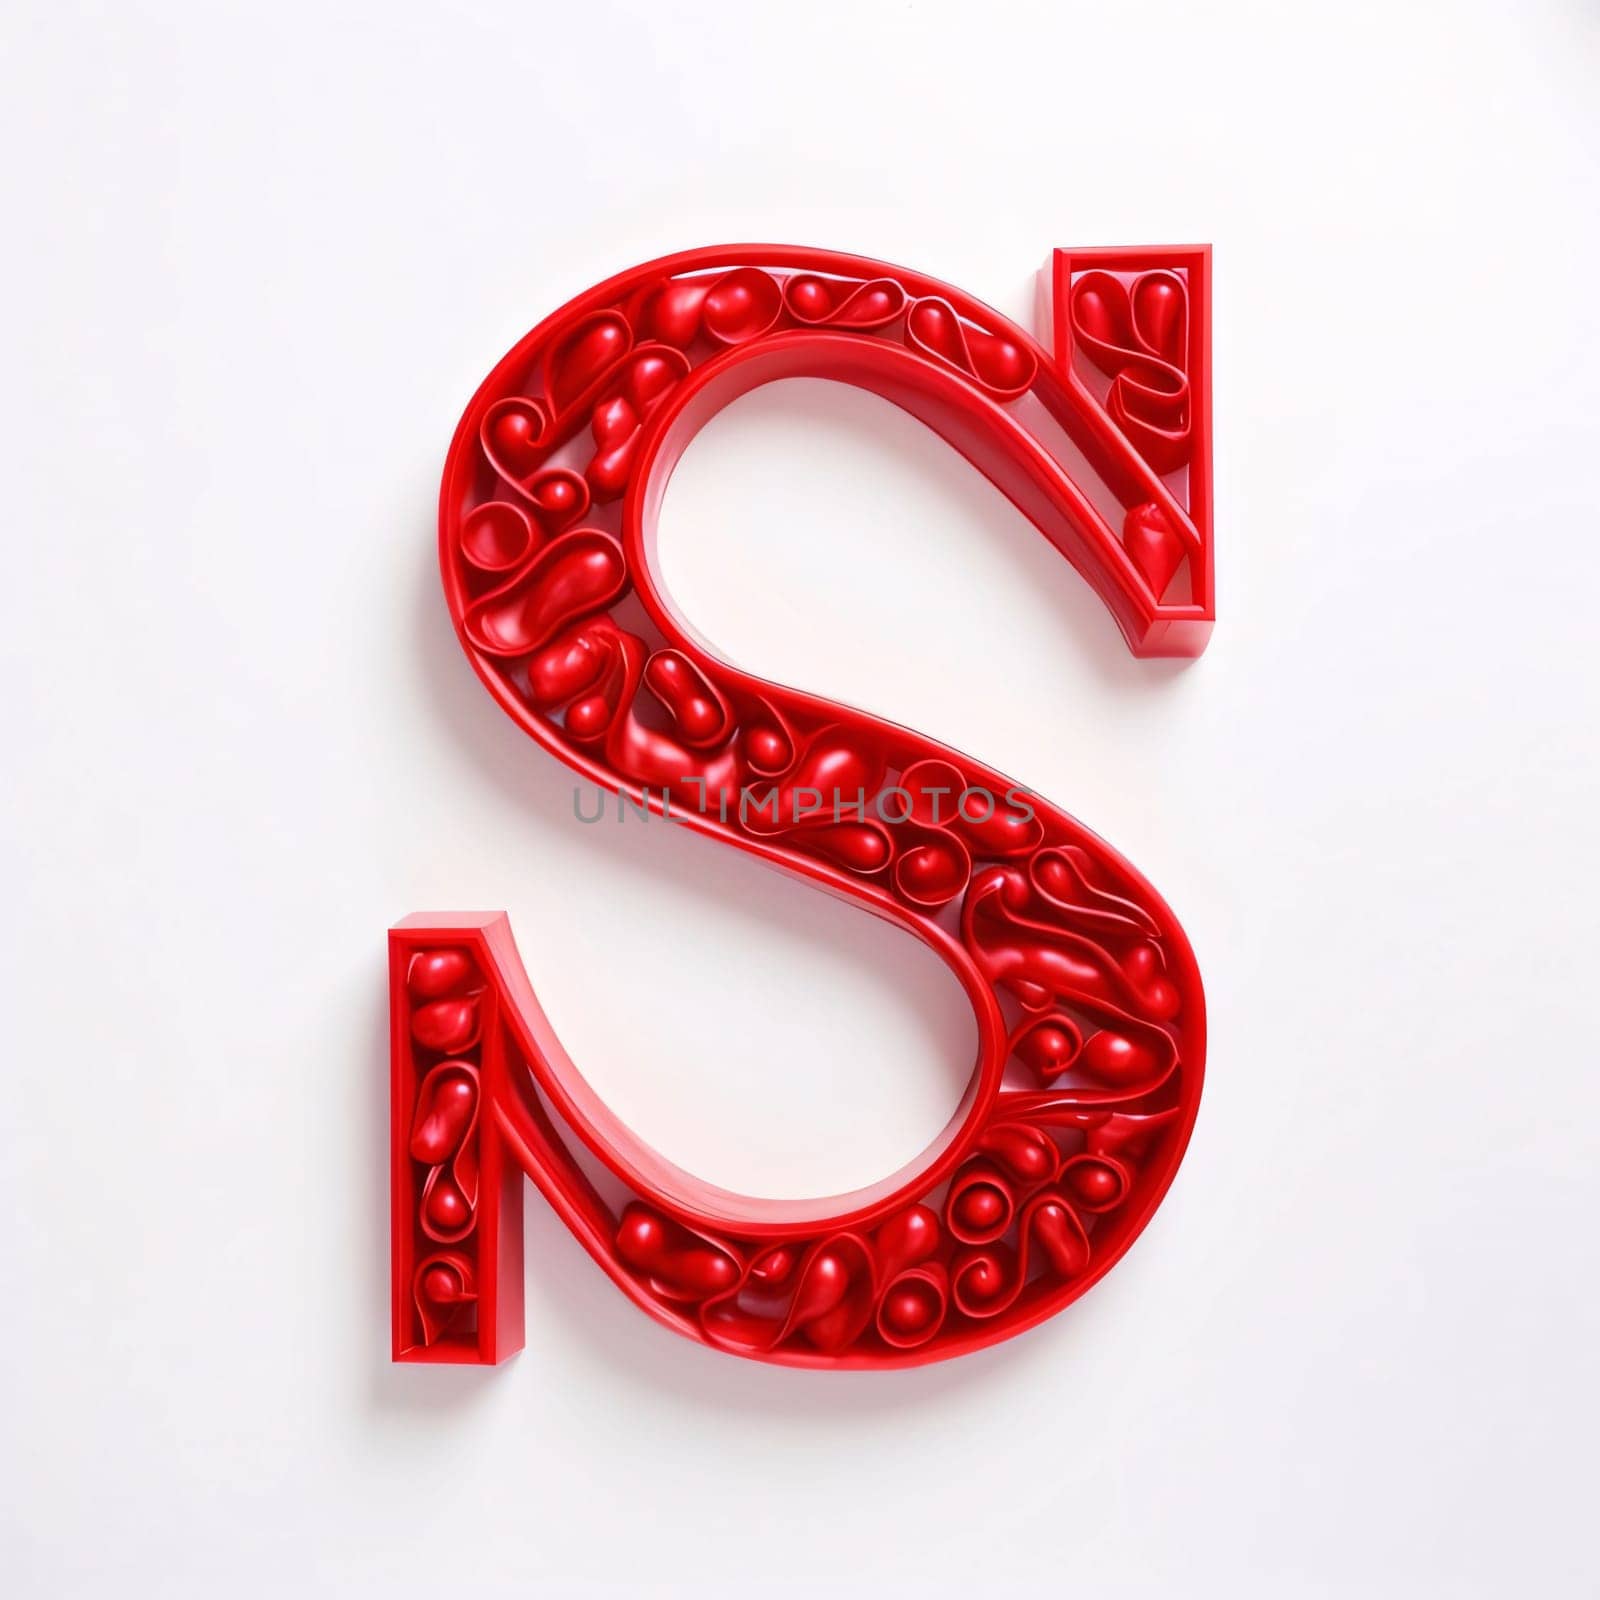 Graphic alphabet letters: Alphabet letter S made of red plastic on white background. 3d rendering